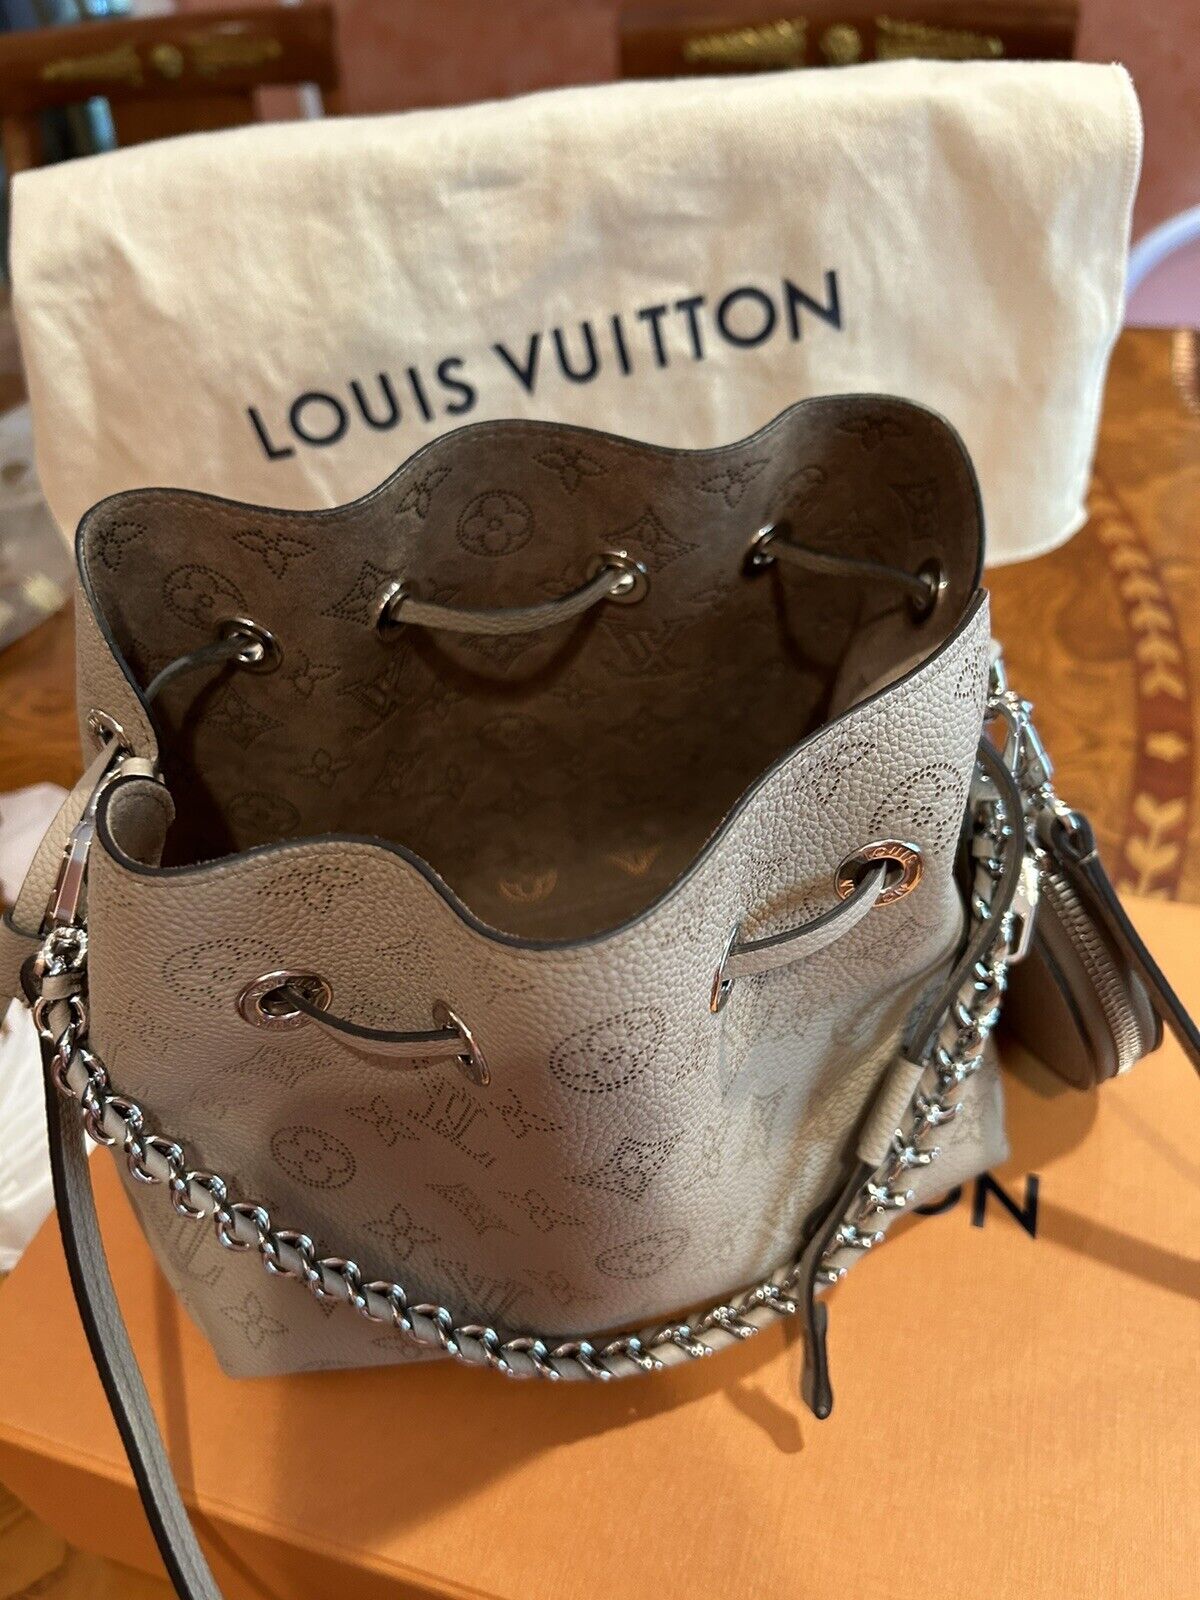 New Authentic Louis Vuitton Bella Bucket Bag In Gray Perforated Monogram  Pattern